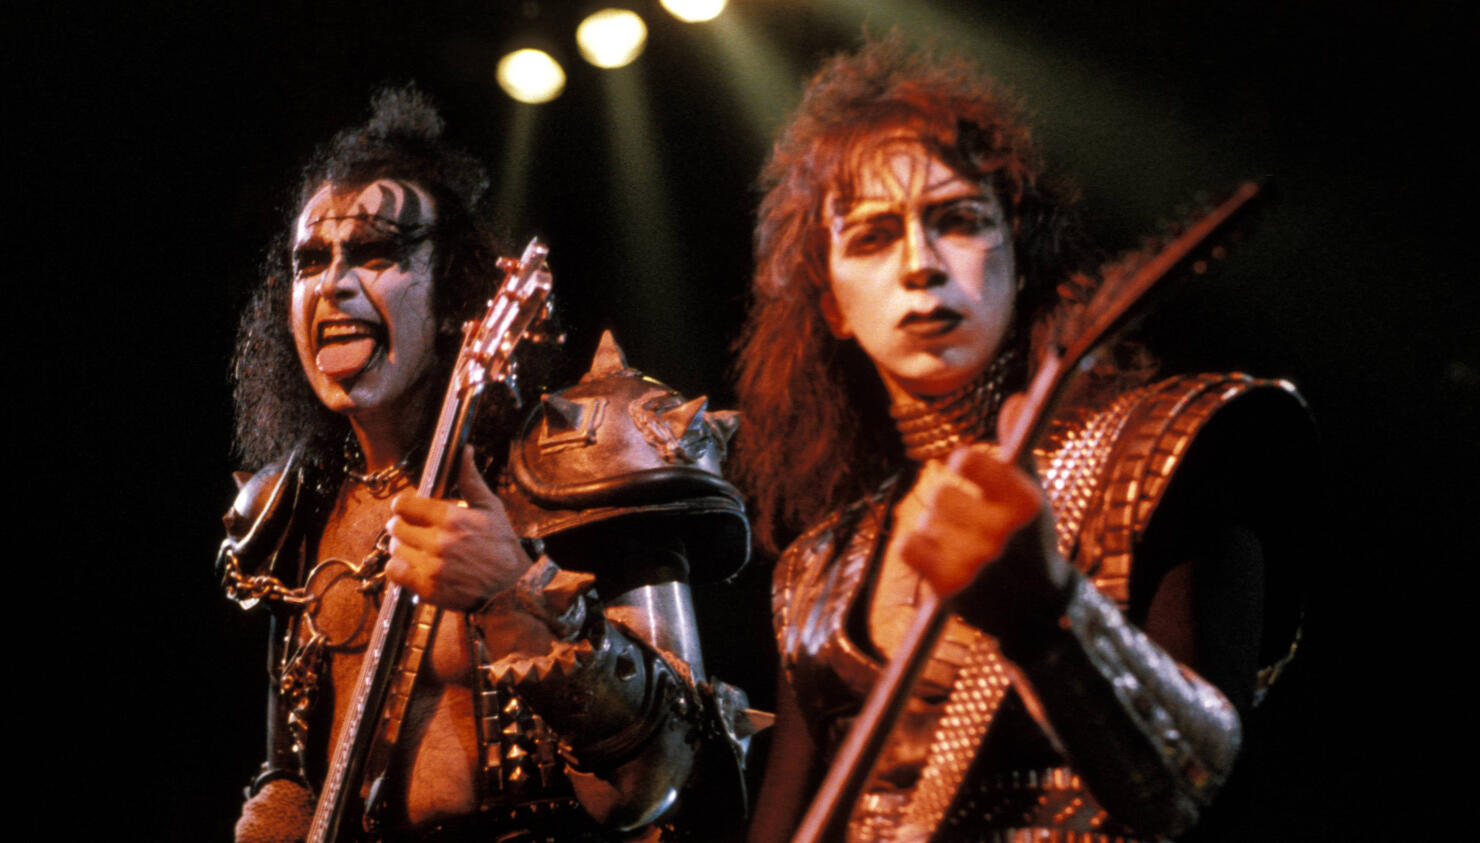 Former KISS Guitarist Vinnie Vincent to Reunite With Gene Simmons